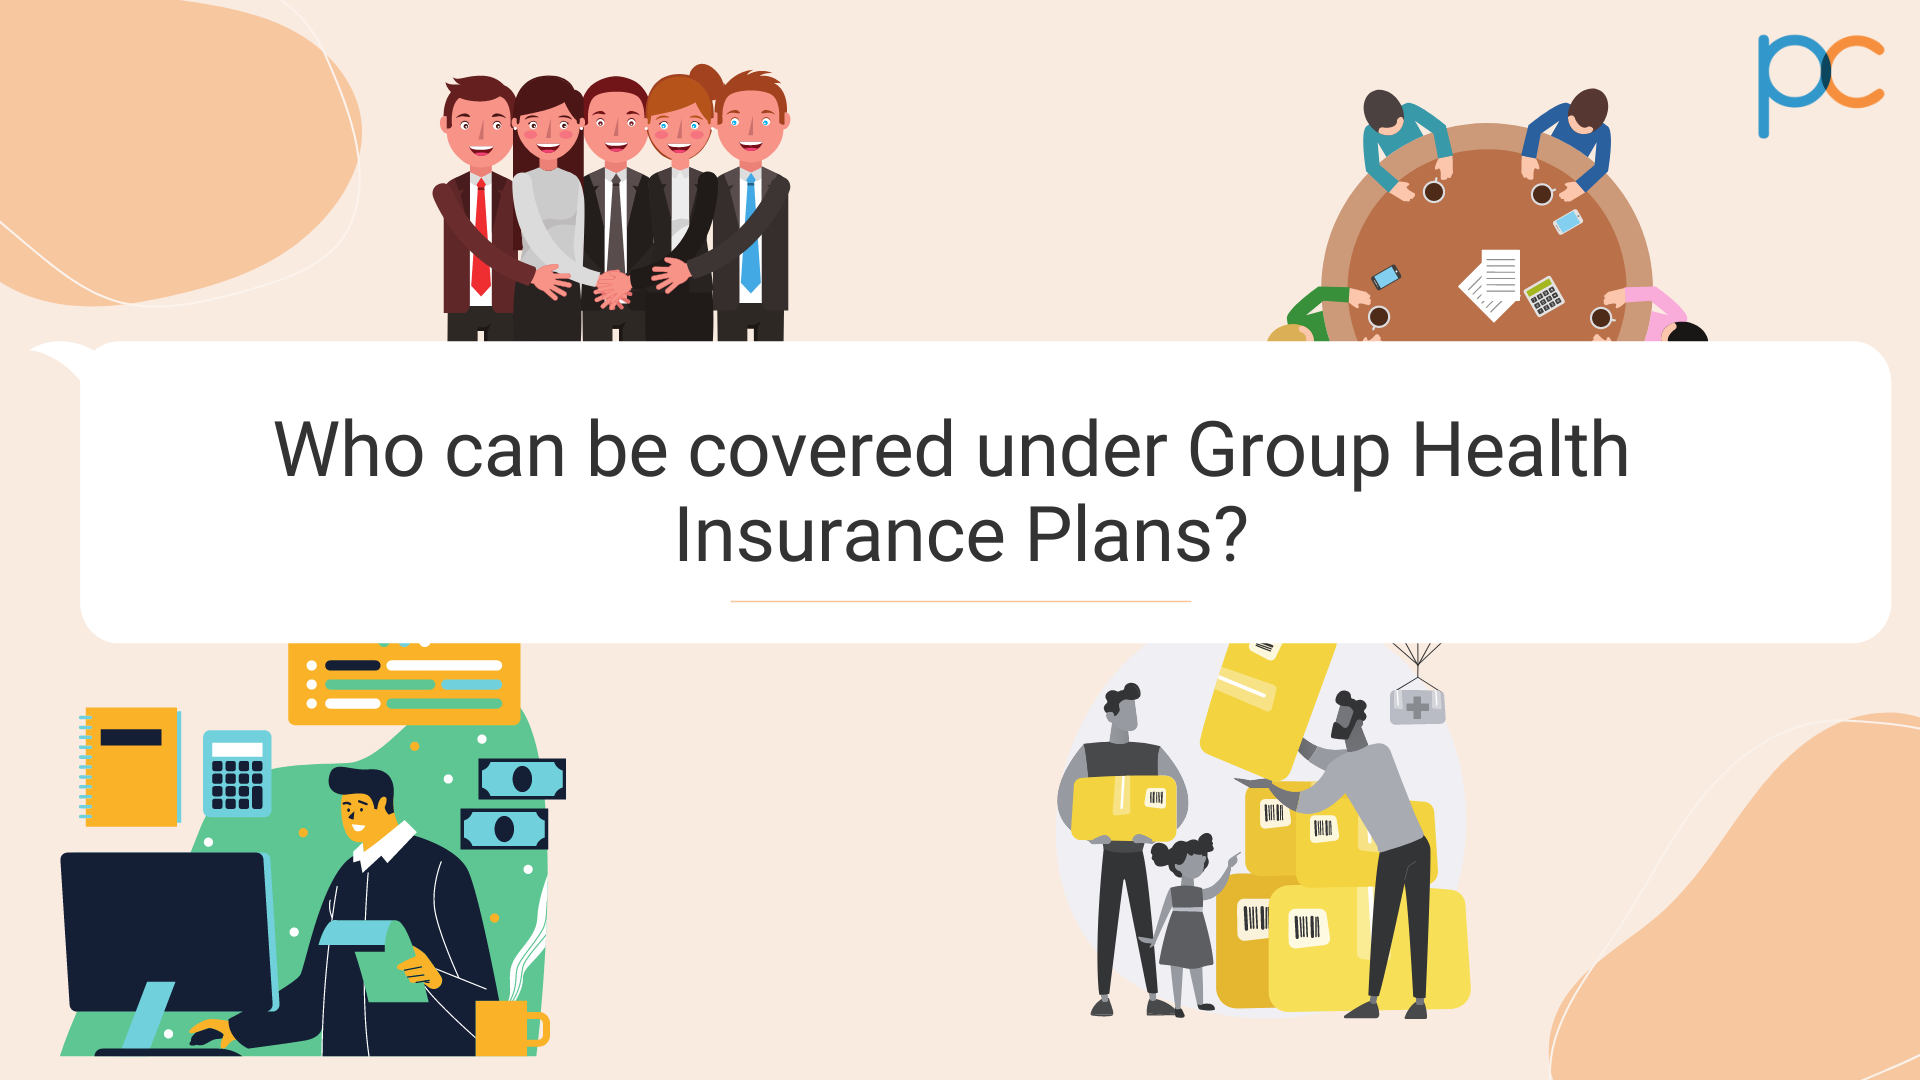 Who can be covered under Group Health Insurance Plans